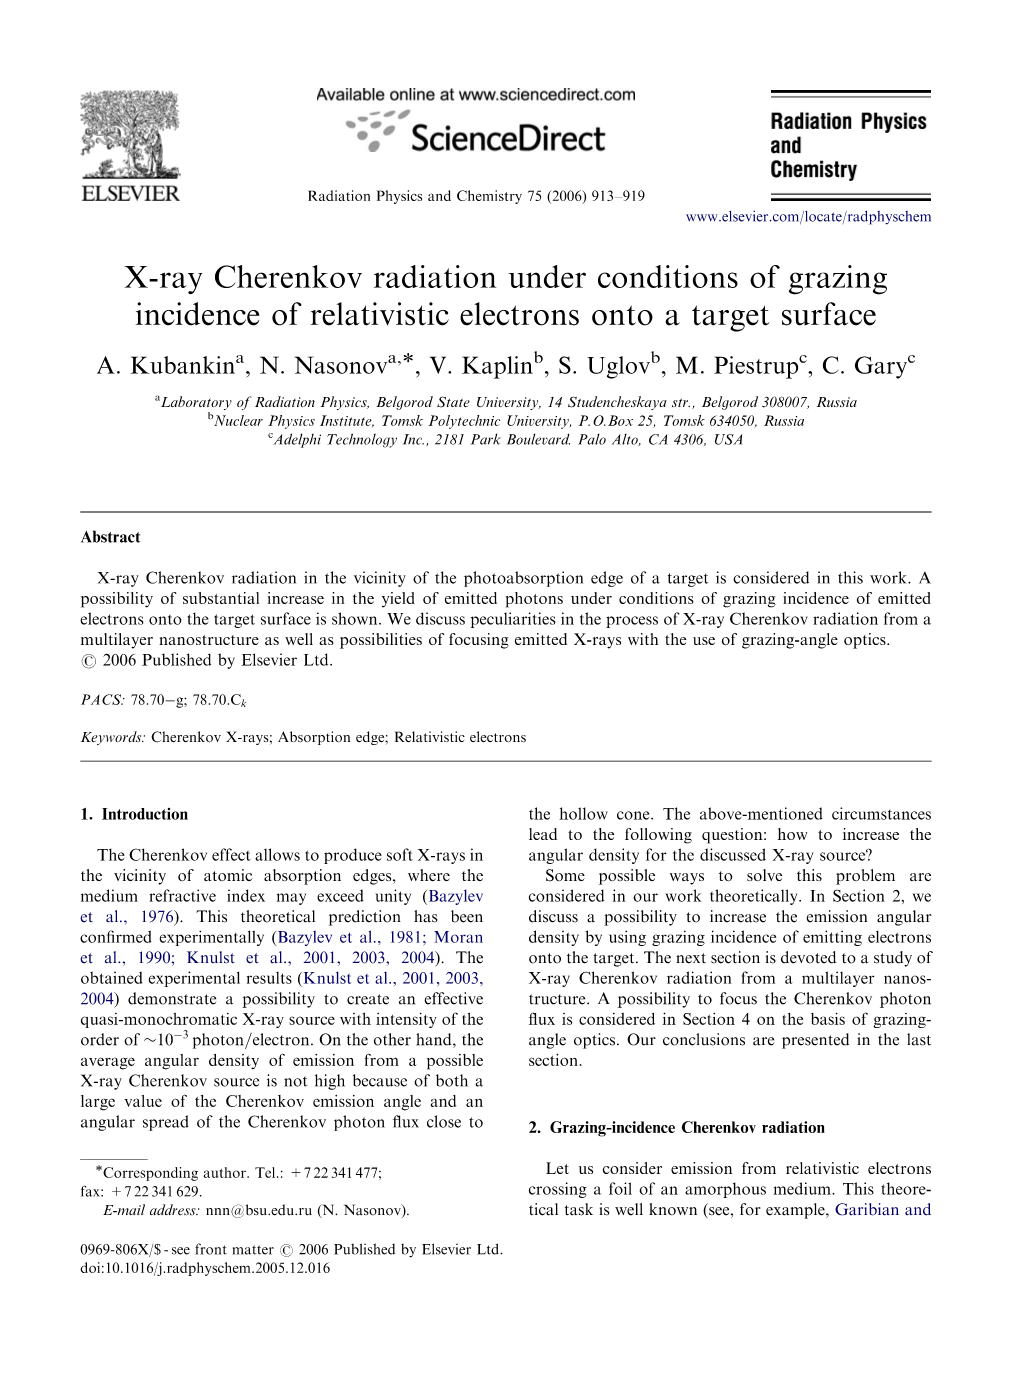 X-Ray Cherenkov Radiation Under Conditions of Grazing Incidence of Relativistic Electrons Onto a Target Surface A